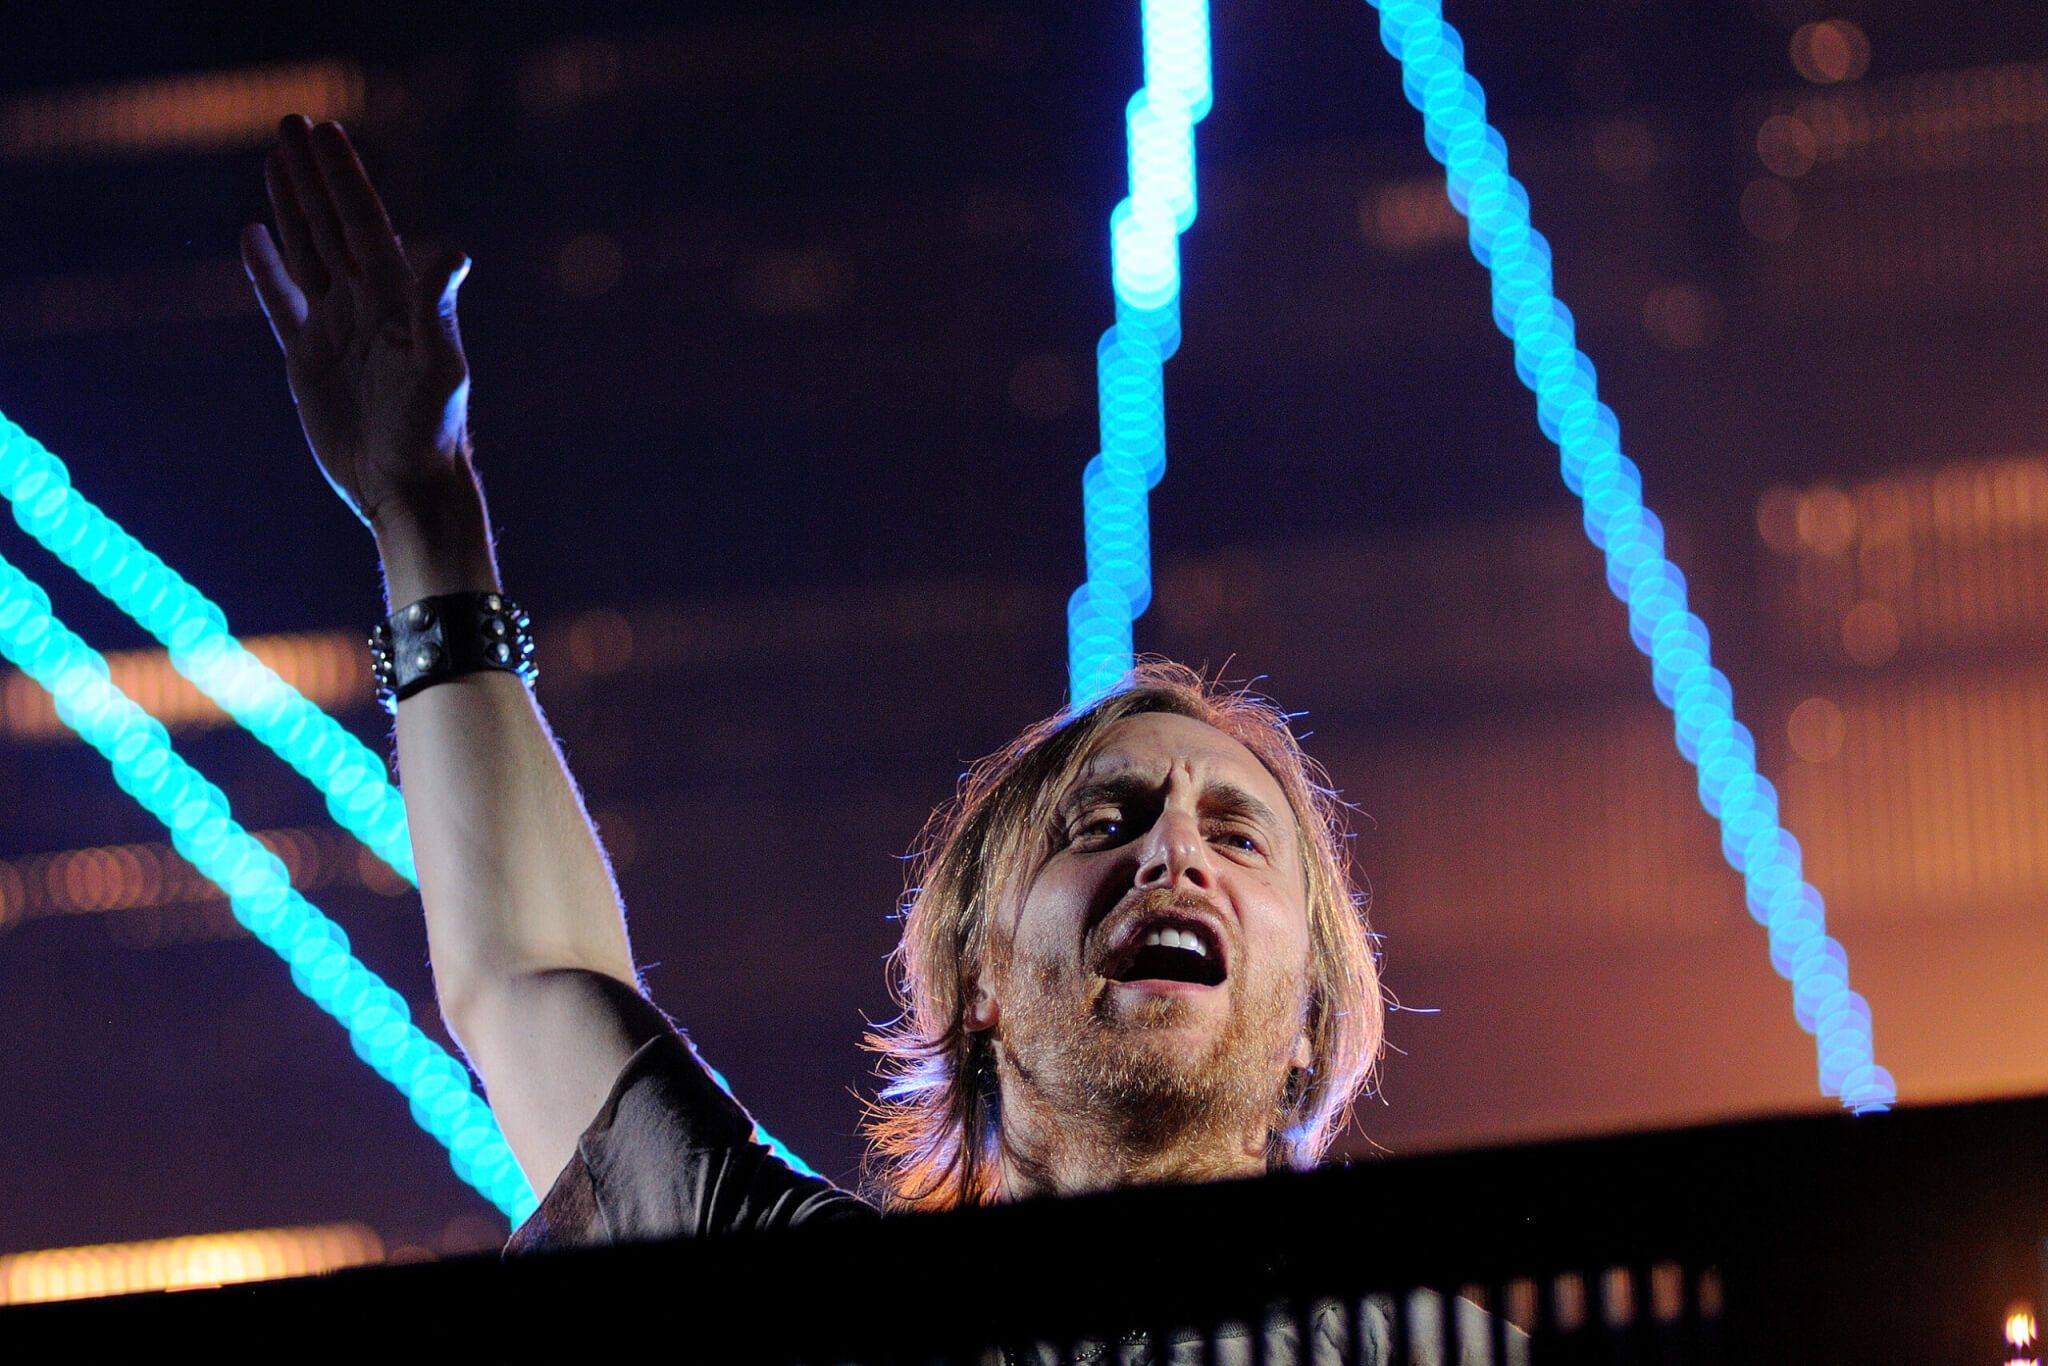 David Guetta performs at FIB on July 15, 2012 in Benicassim, Spain